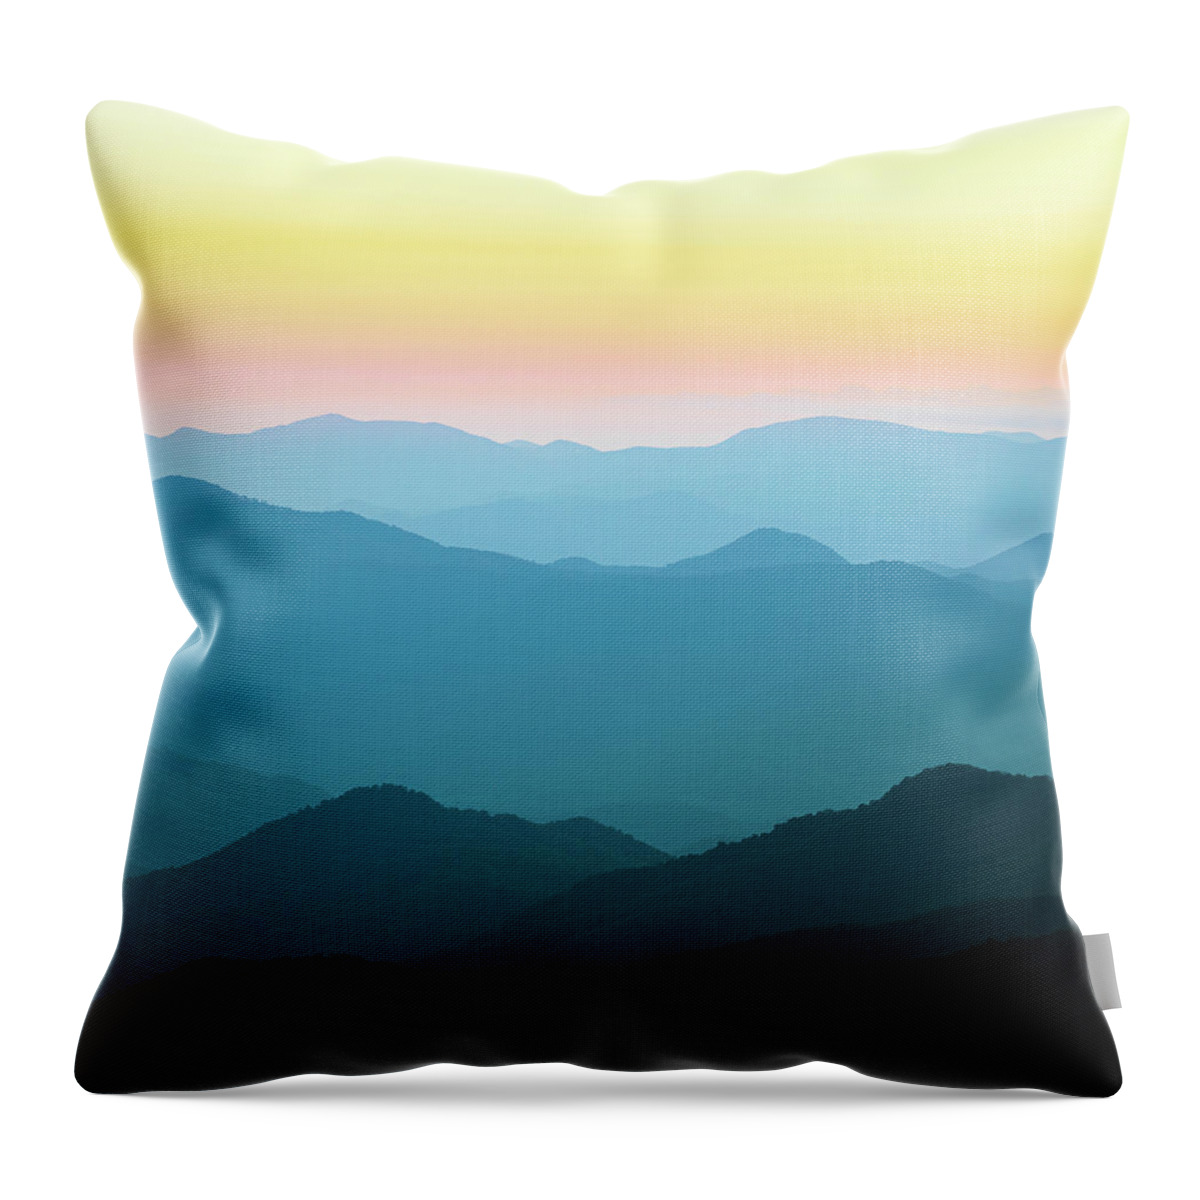 Cowee Moutain Throw Pillow featuring the photograph Cowee Mountain Sunset Views North Carolina by Jordan Hill